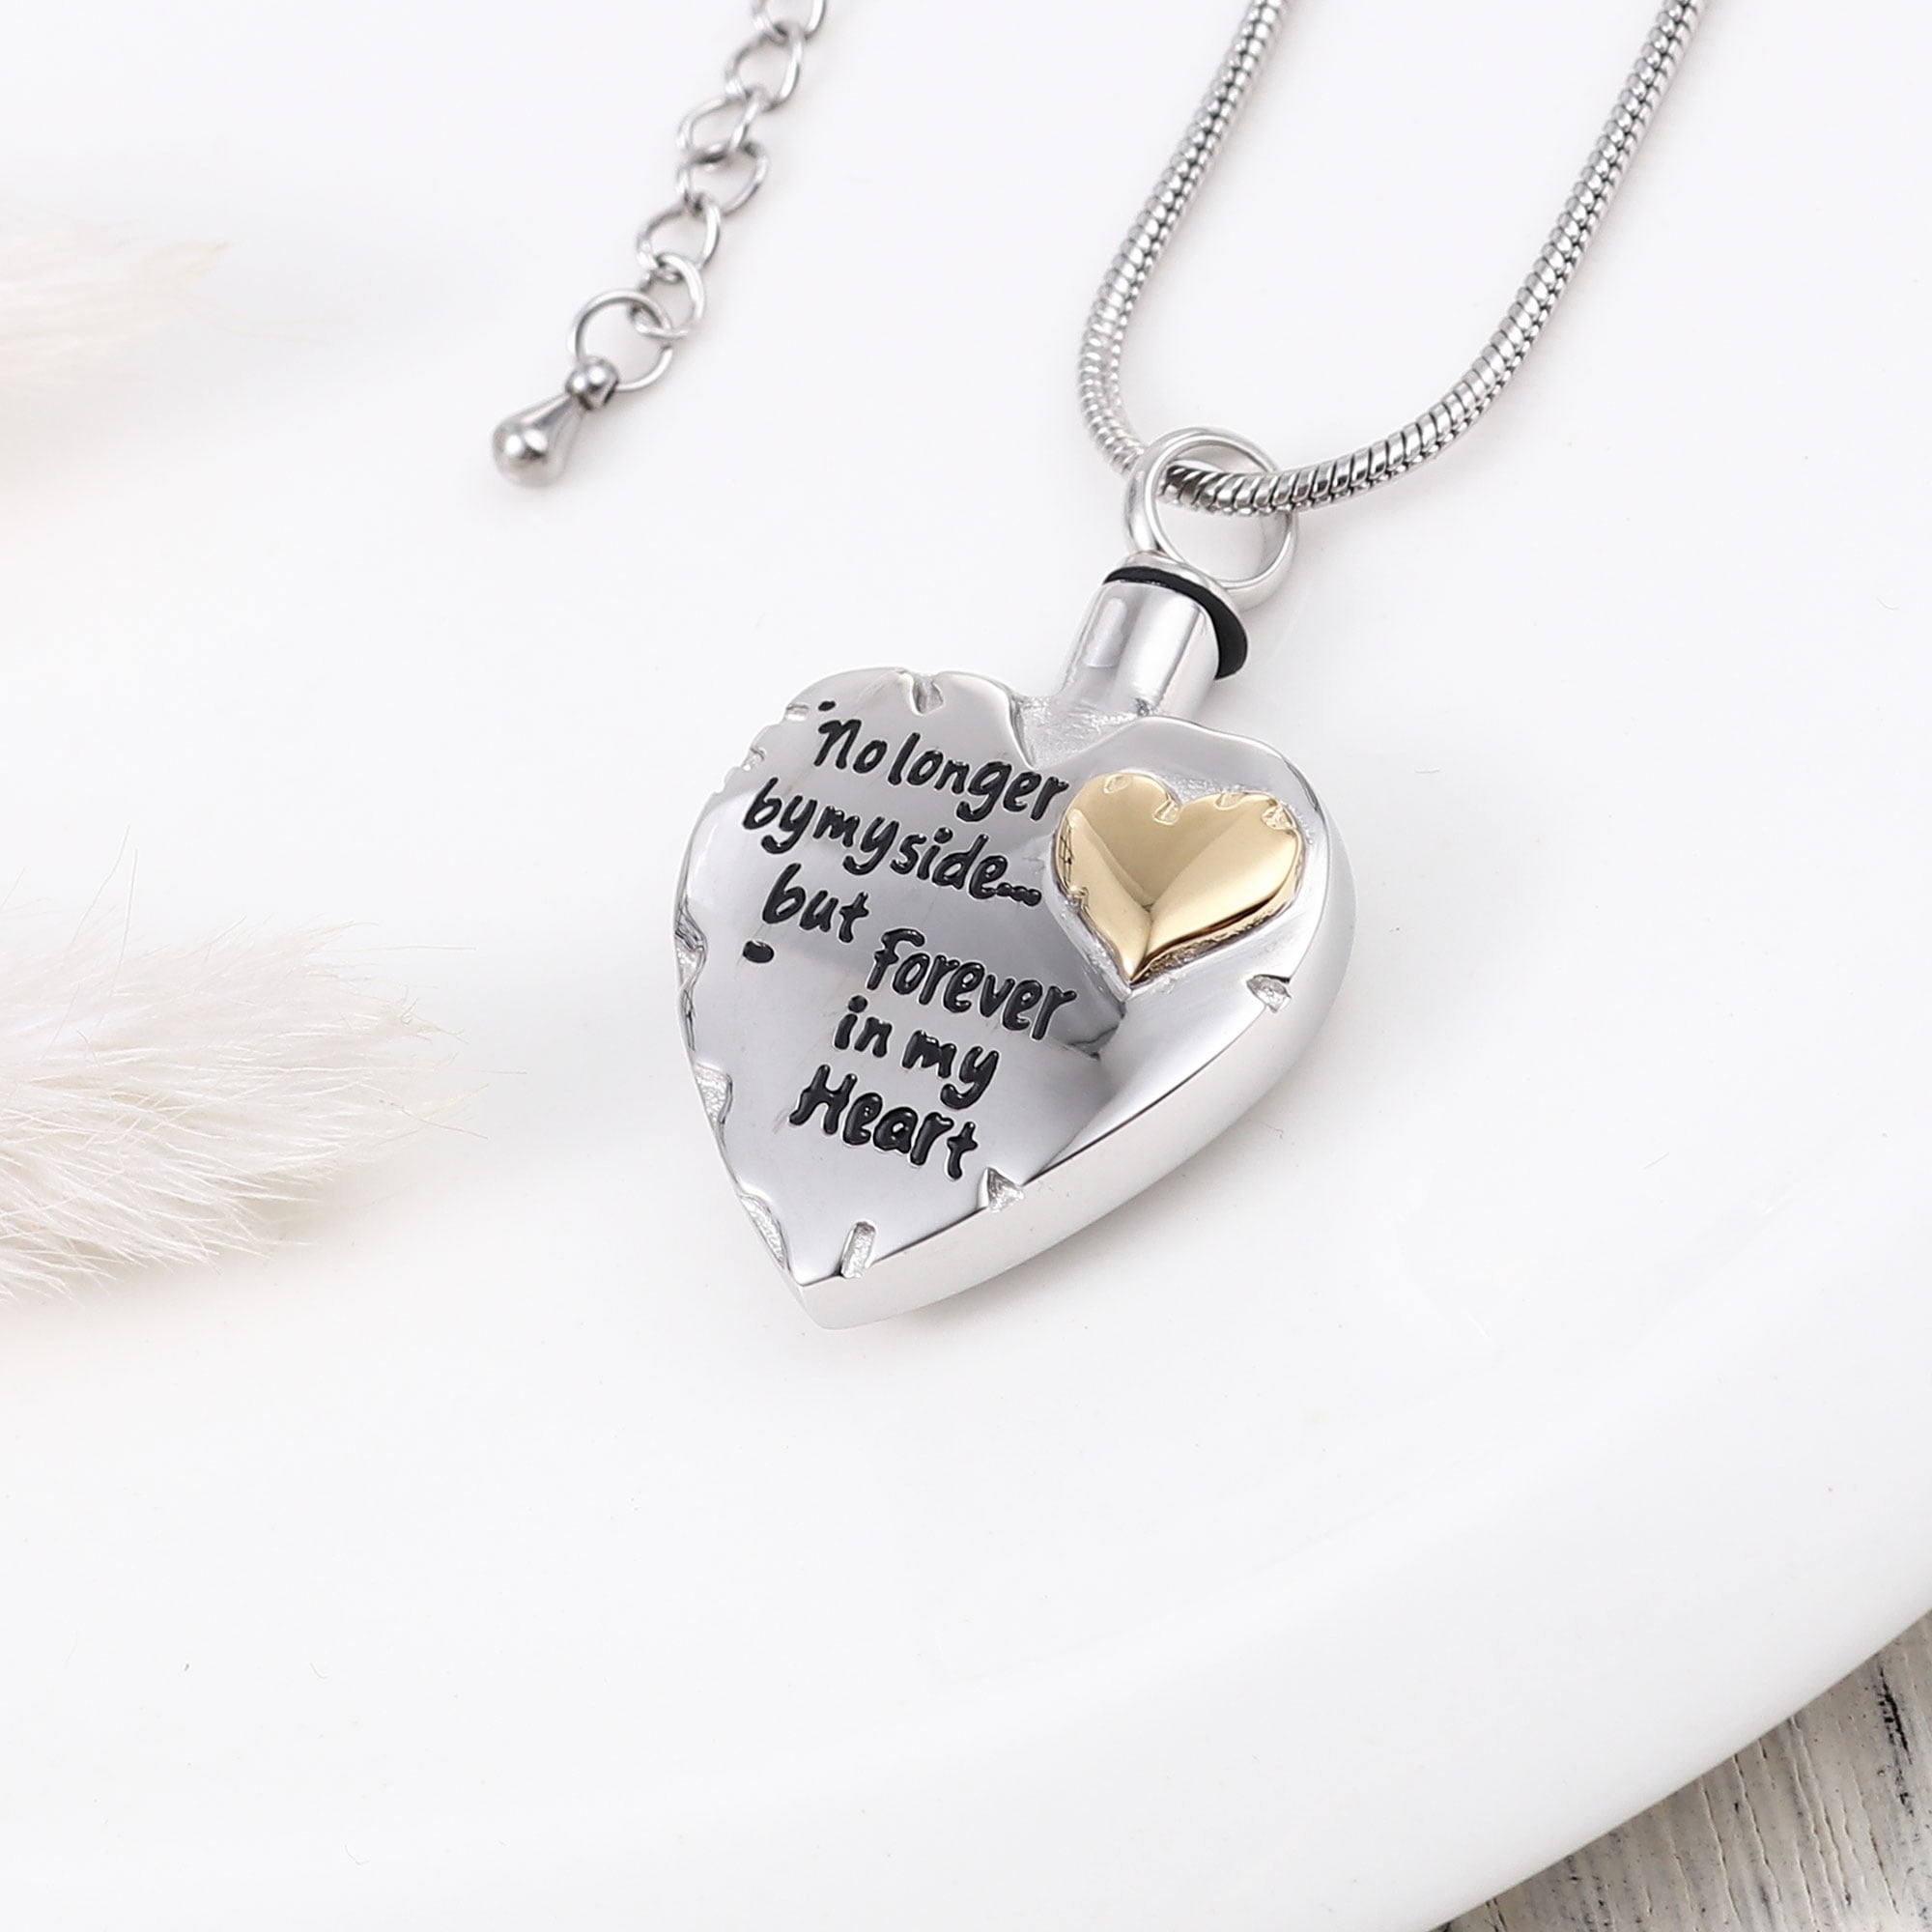 Double Ring Cremation Urn Ashes Necklace No Longer by My Side,Forever in My Heart Carved Locket Waterproof Memorial Pendant 